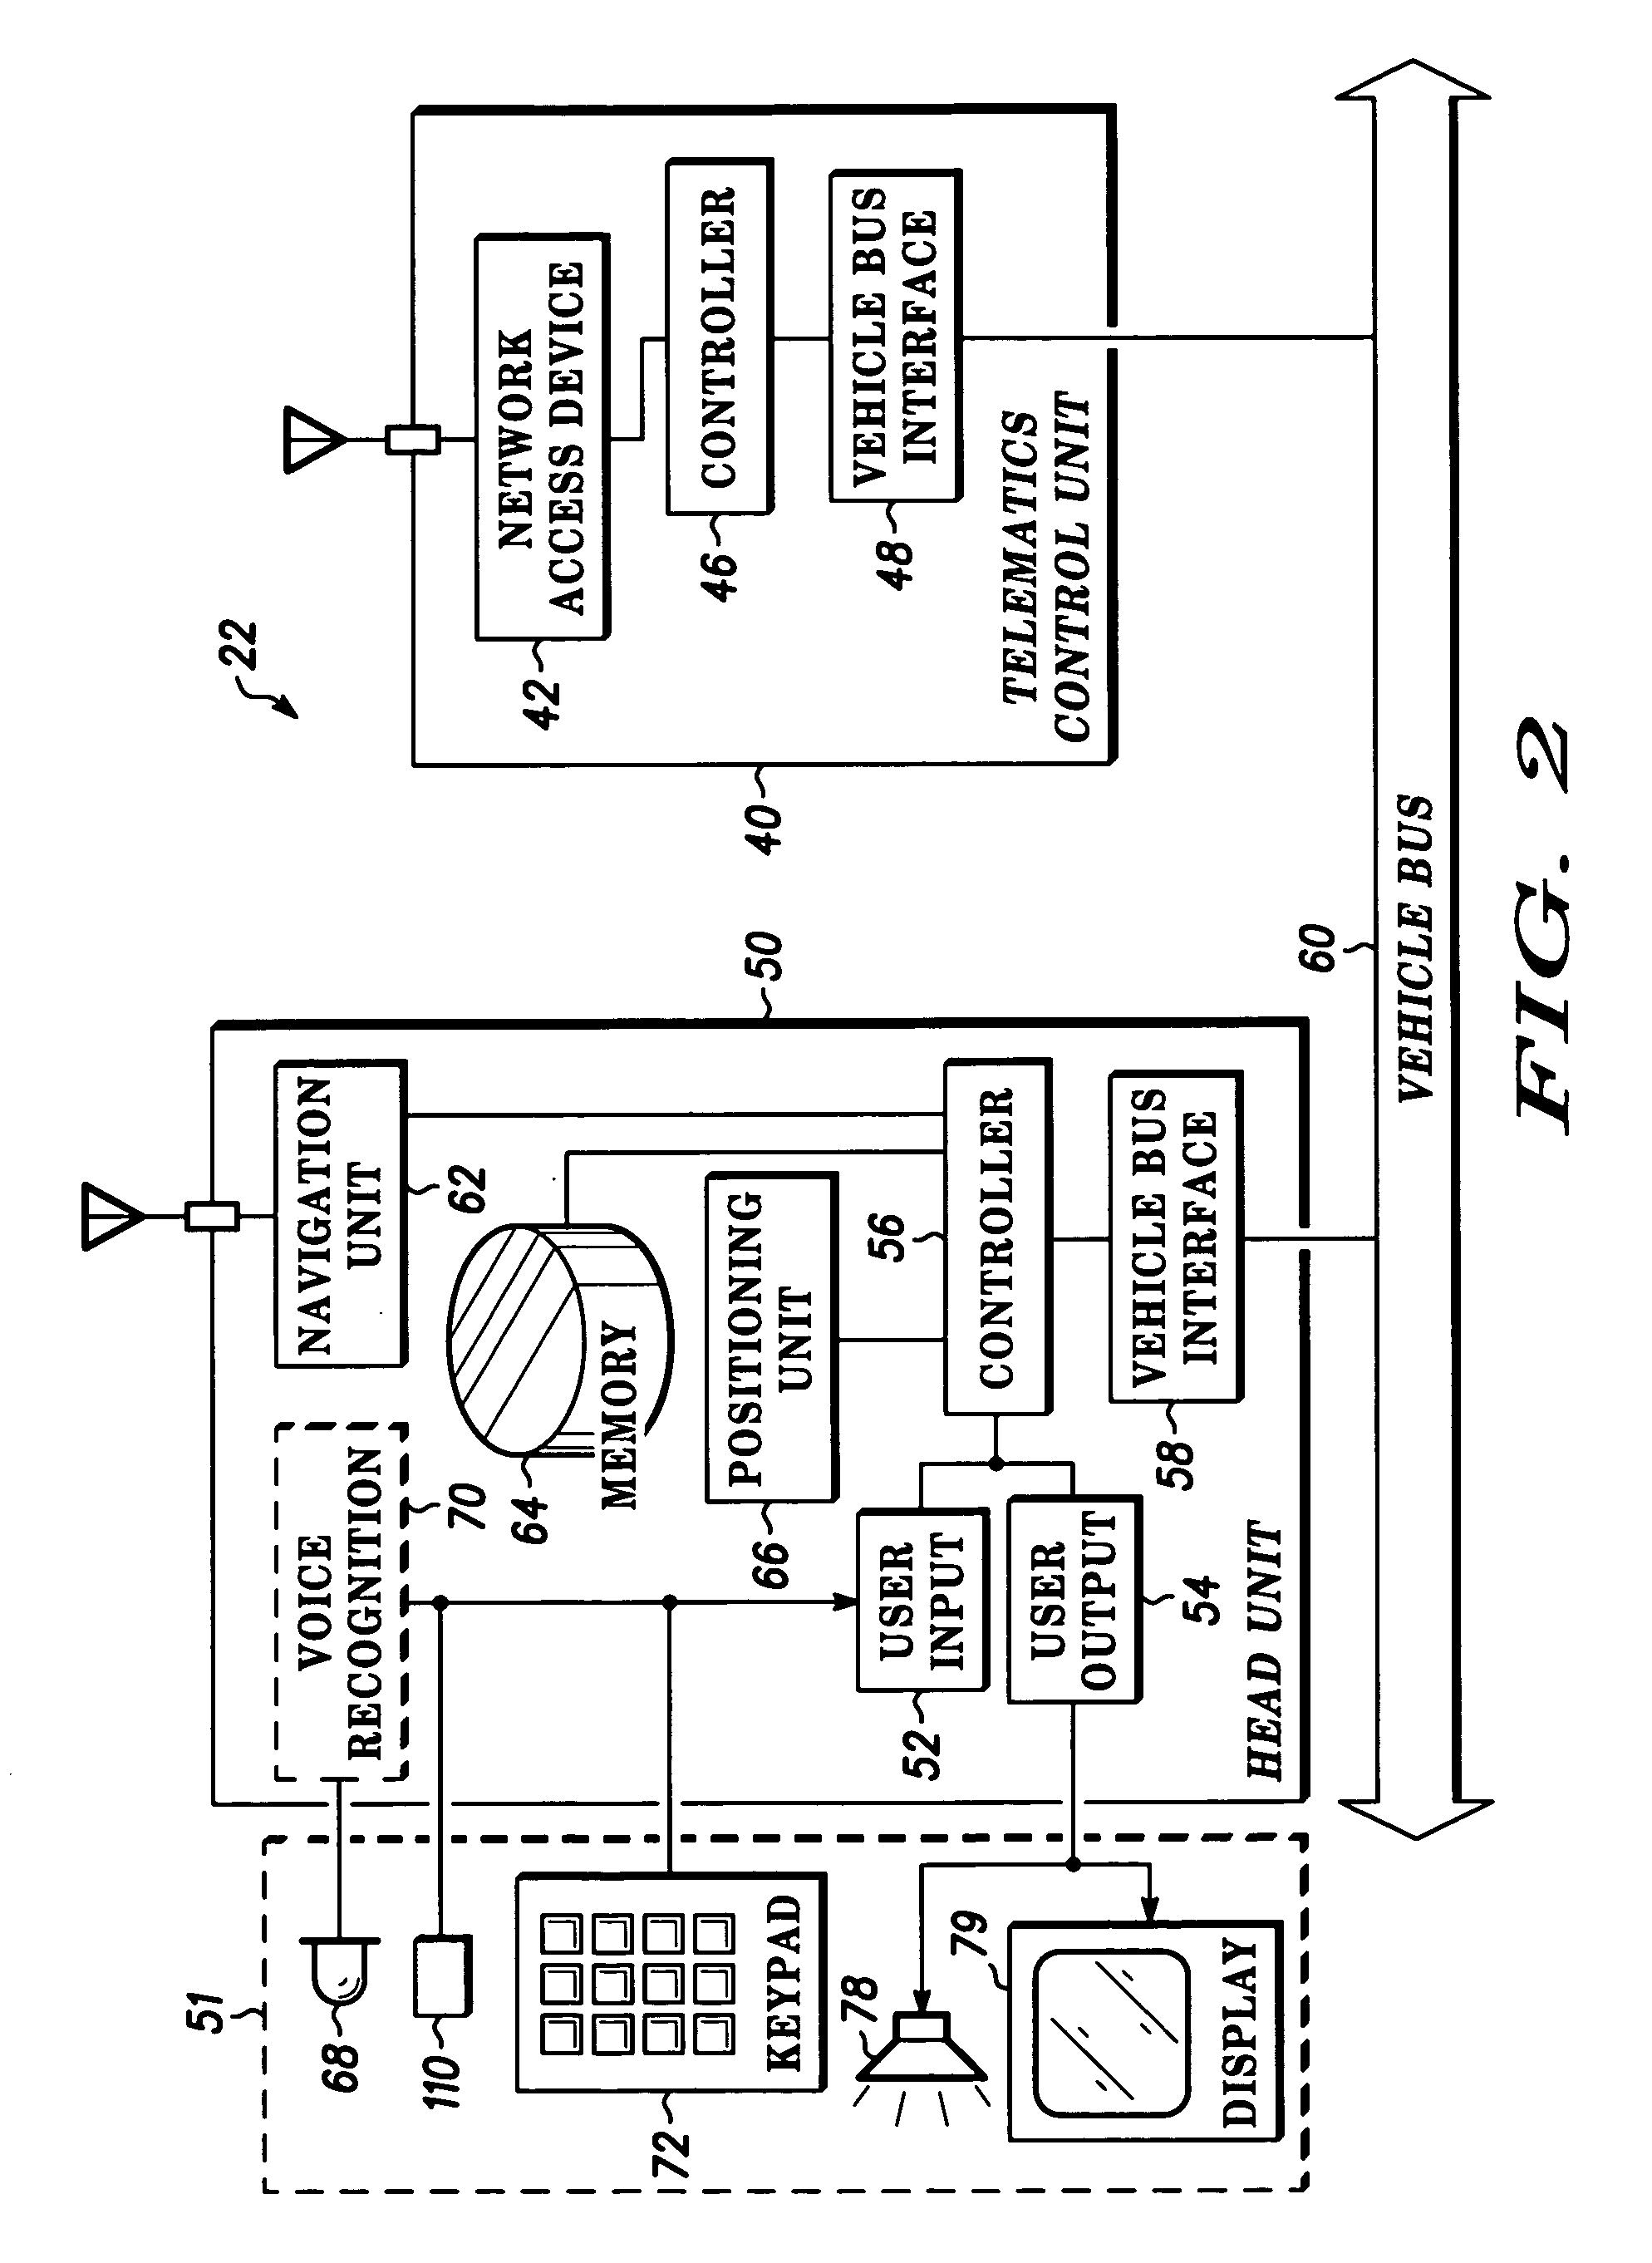 Programmable foot switch useable in a communications user interface in a vehicle